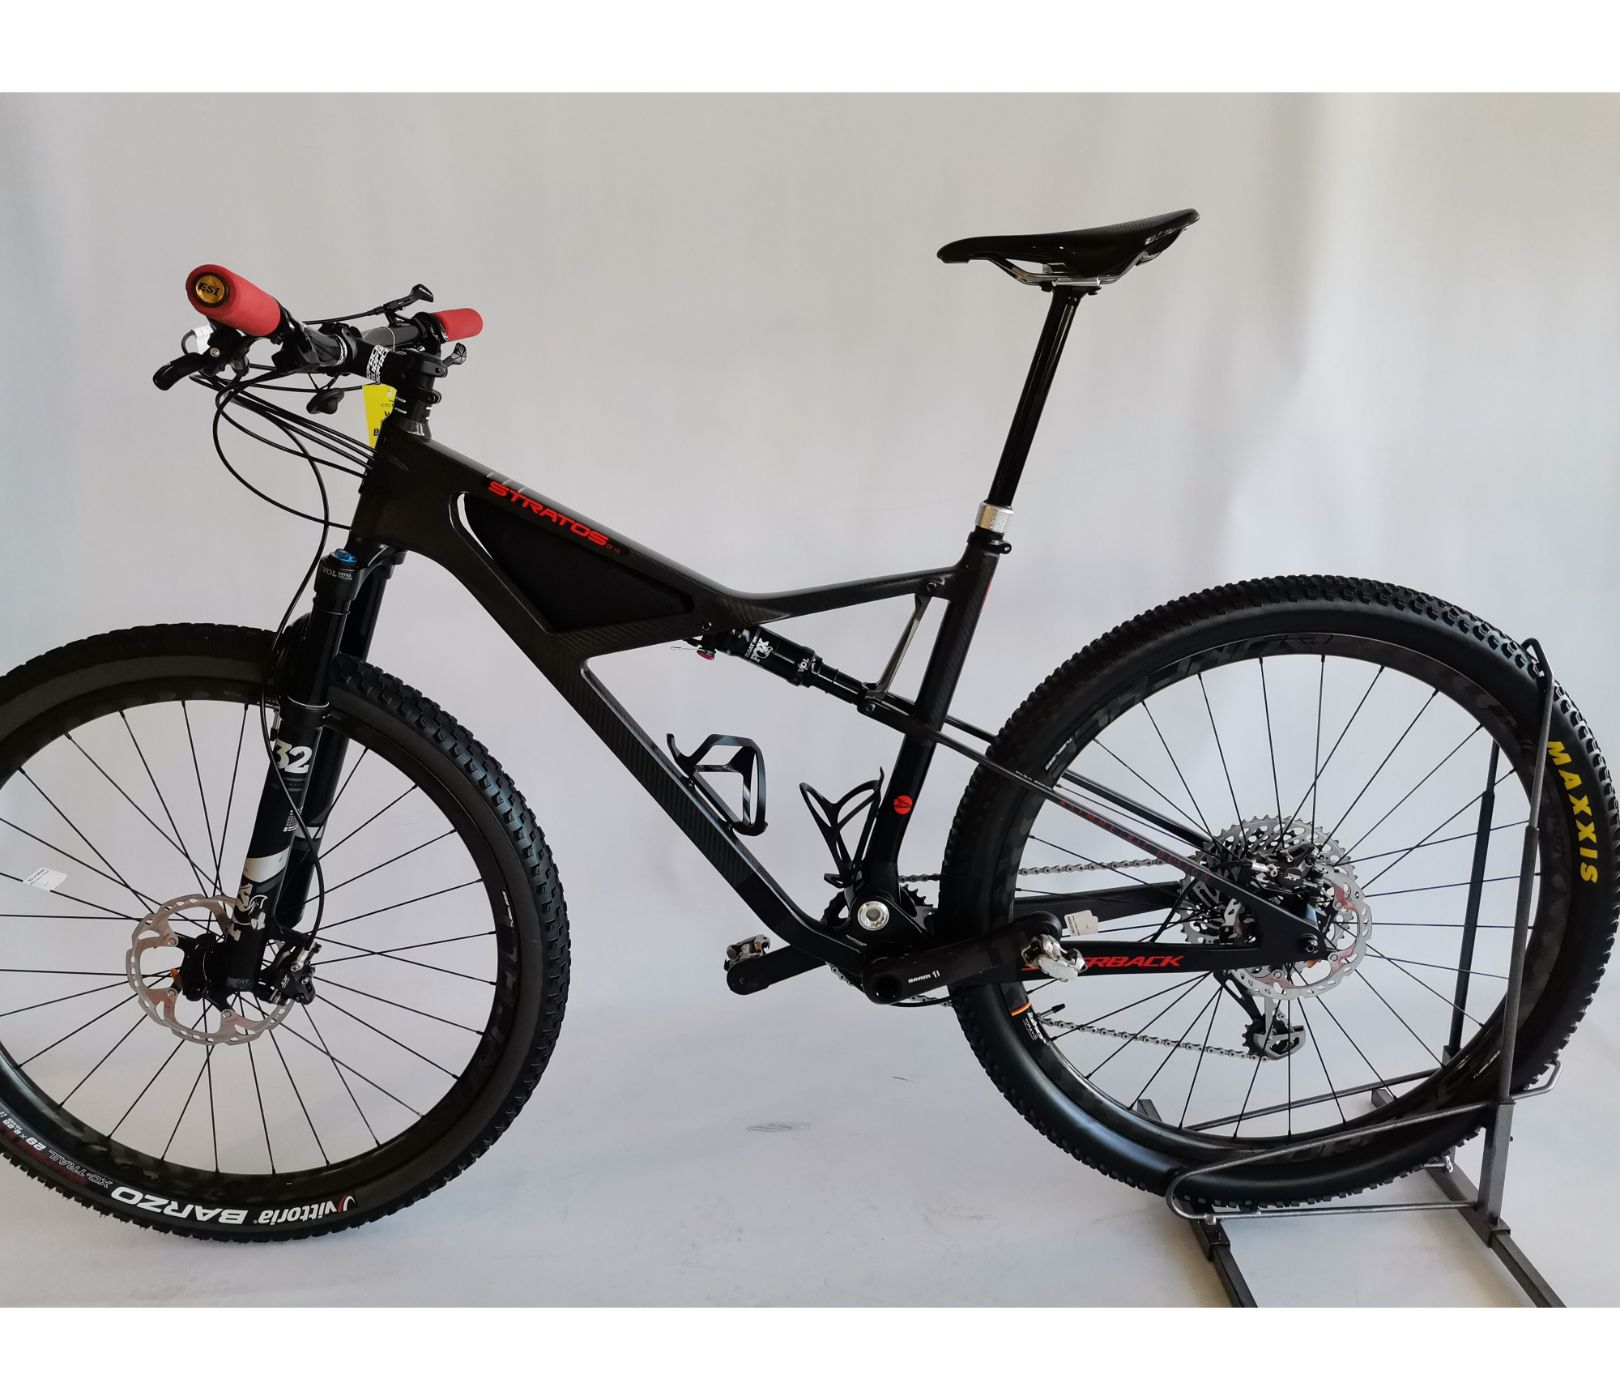 Pre-Owned Silverback Stratos Carbon Dual Suspension Mountain Bike - L